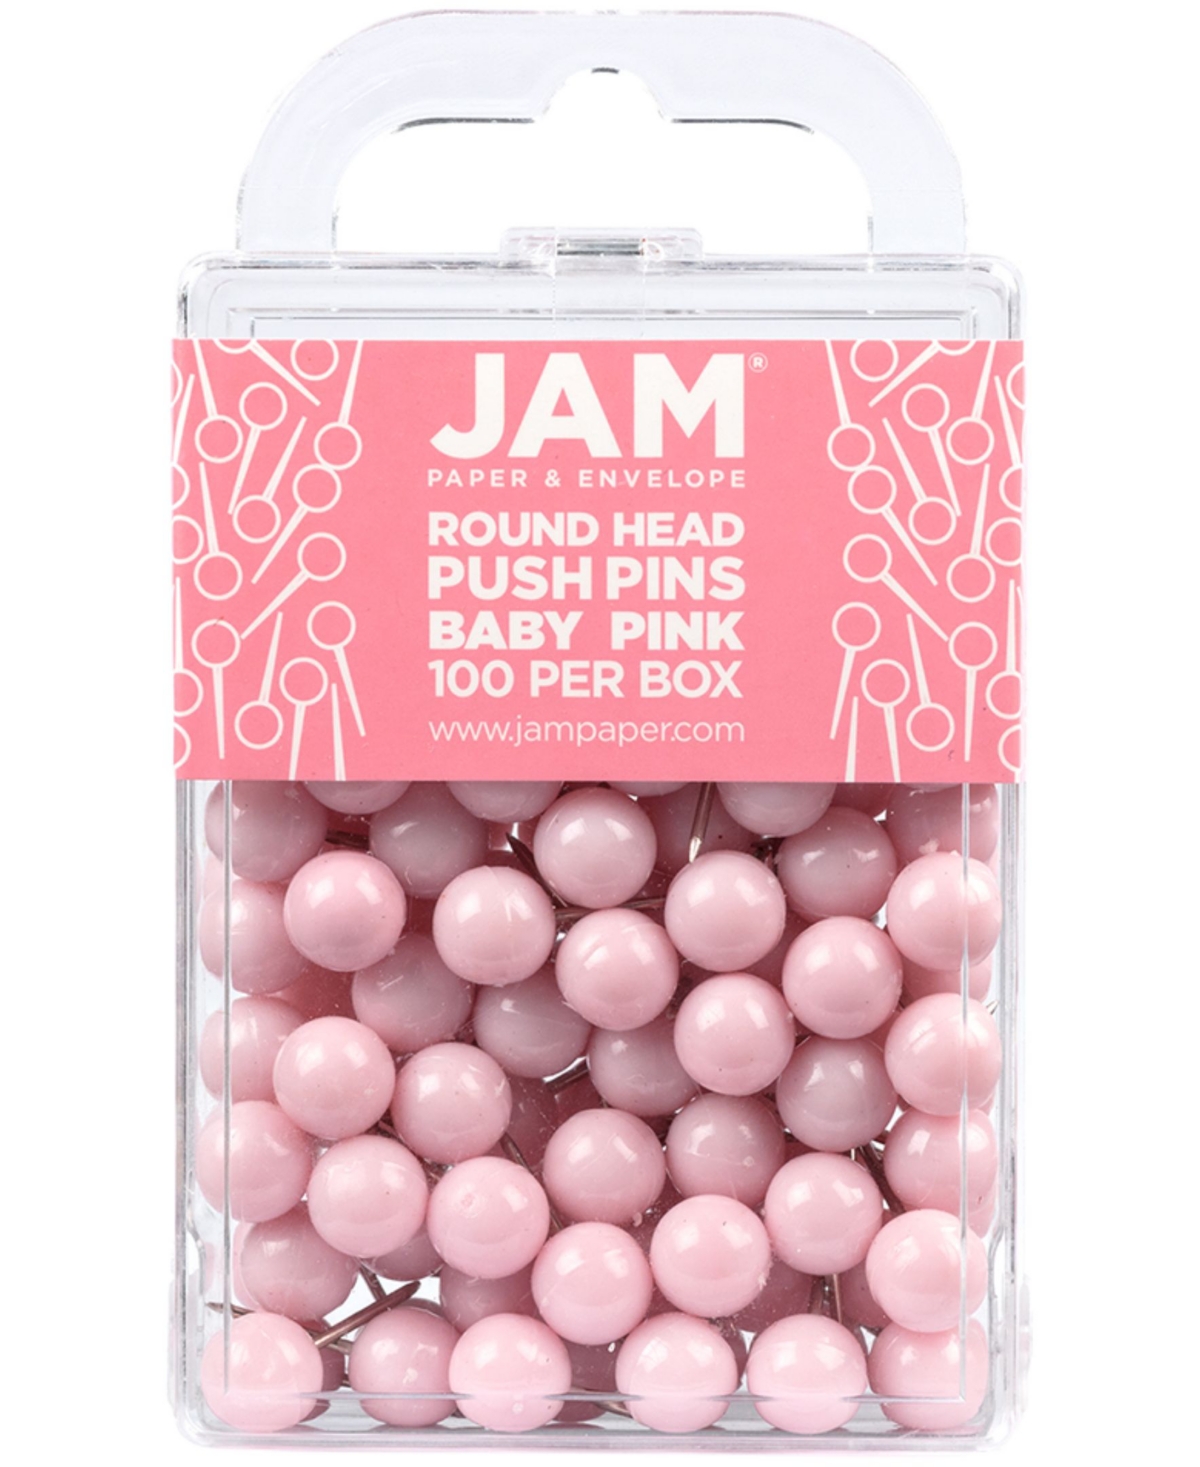 Jam Paper Colorful Push Pins In Baby Pink